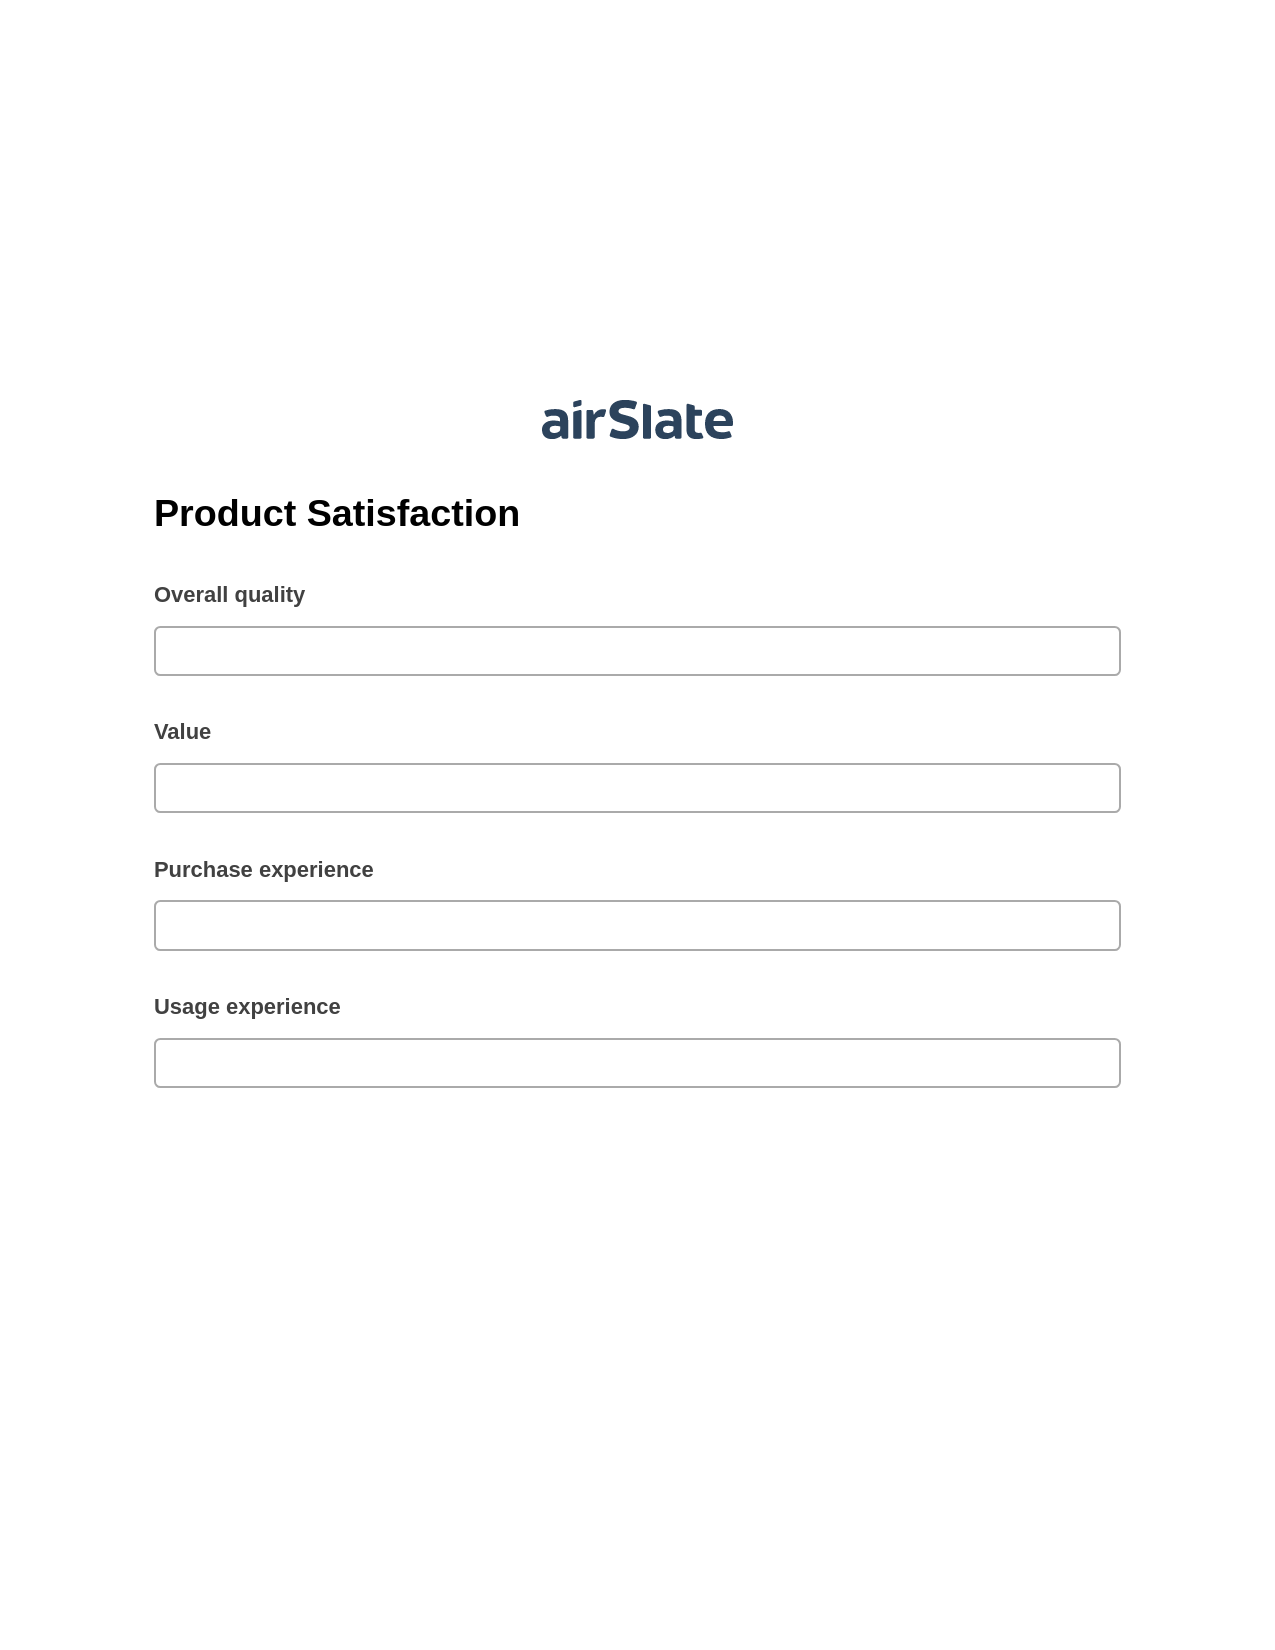 Multirole Product Satisfaction Pre-fill Dropdowns from CSV File Bot, Invoke Salesforce Process Bot, Archive to SharePoint Folder Bot